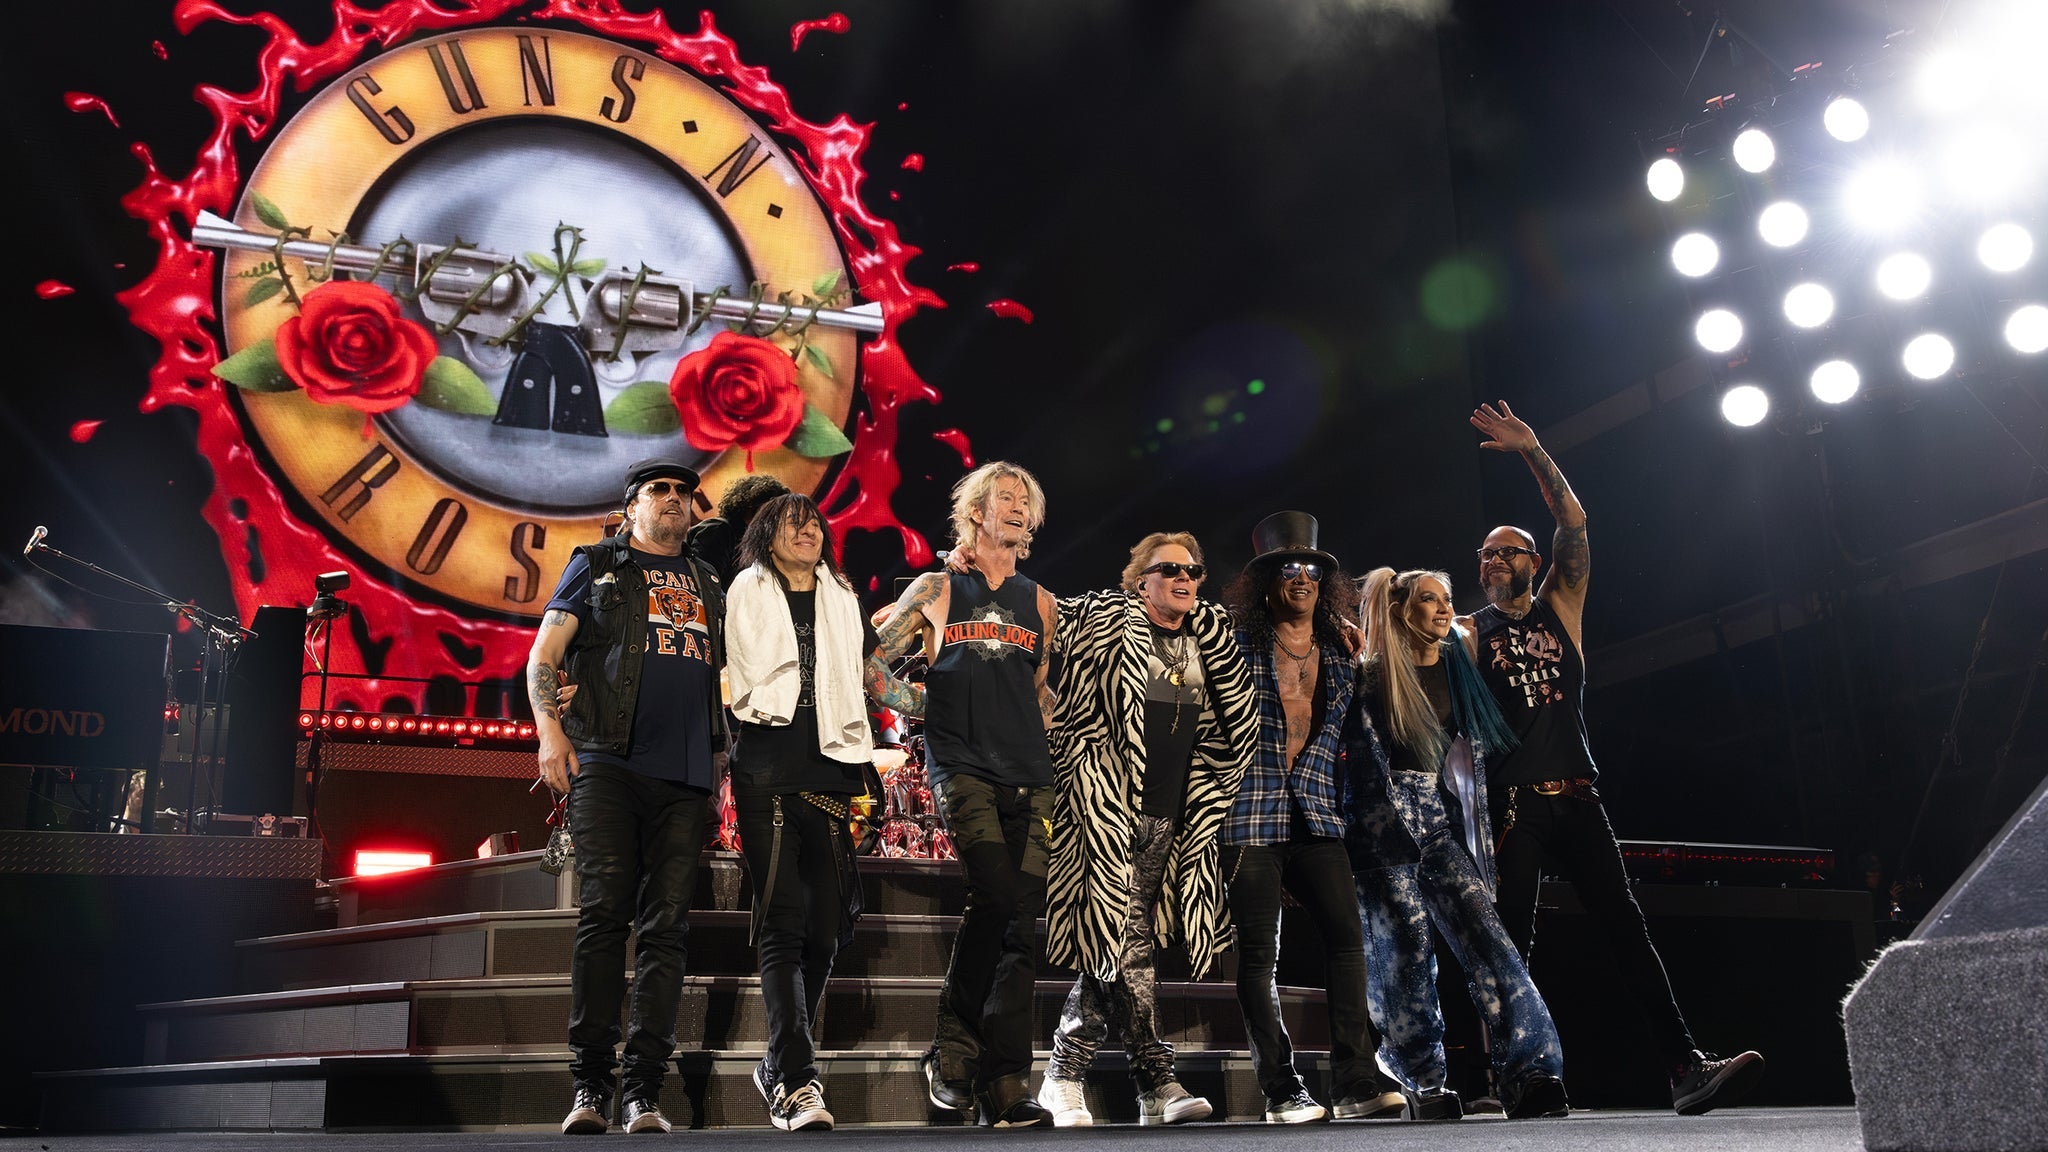 Guns N' Roses Welcomes Texas Firearms and Flower Shop to the Jungle